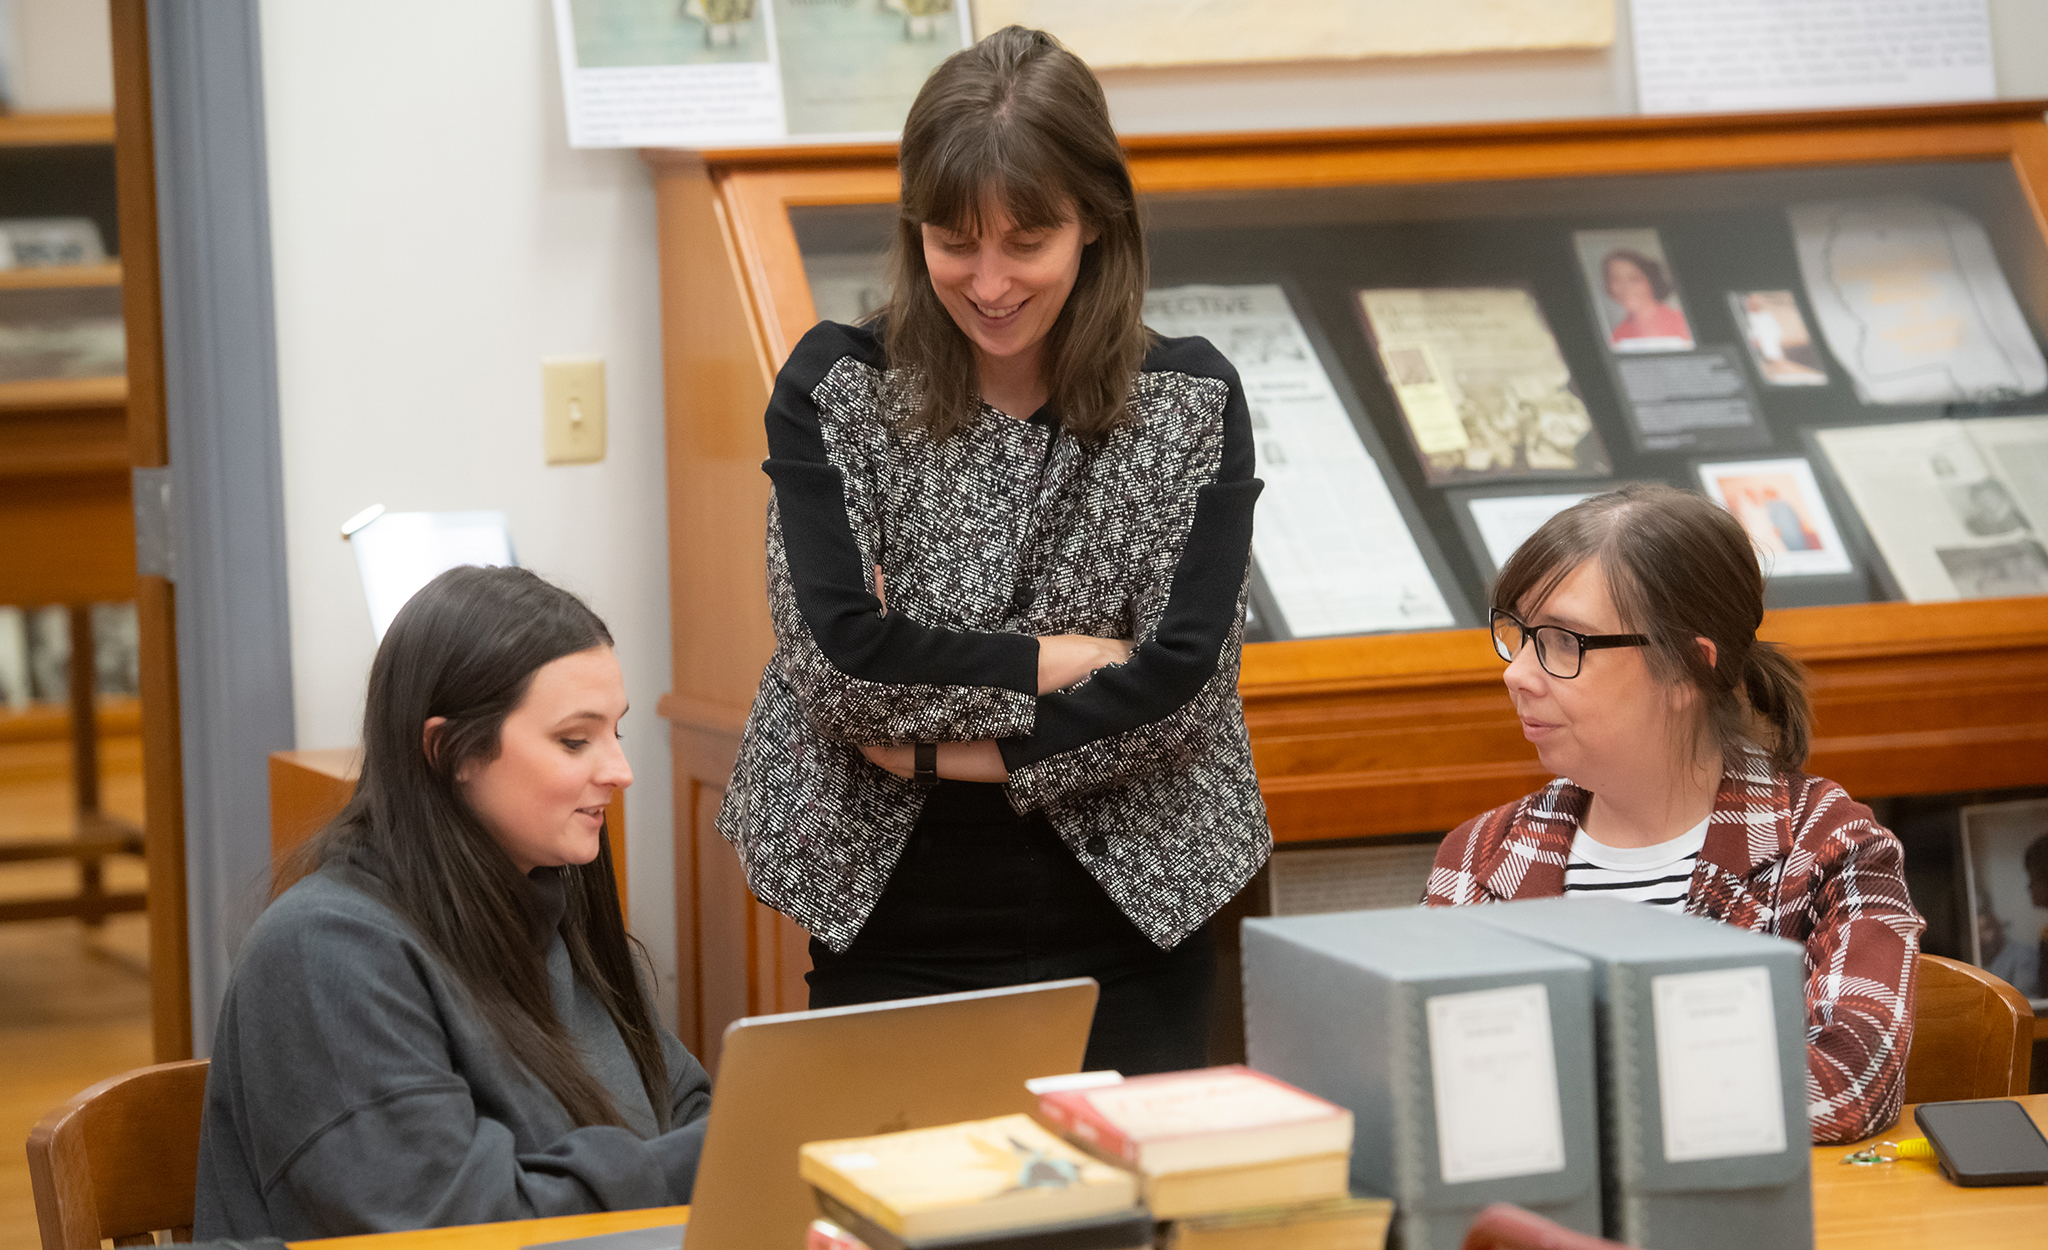 Eva Payne (center), UM associate professor of history, speaks with Madeline Burdine (left), a first-year graduate sociology and anthropology student, and Angie Rankin, a second-year sociology graduate student, about their display for the Queer Mississippi Exhibit in the Department of Archives and Special Collections in the J.D. Williams Library. The exhibit uses university archival materials and quotes from the Queer Mississippi Oral History project to show the history of LGBTQ+ people in the state. Photo by Kevin Bain/Ole Miss Digital Imaging Services